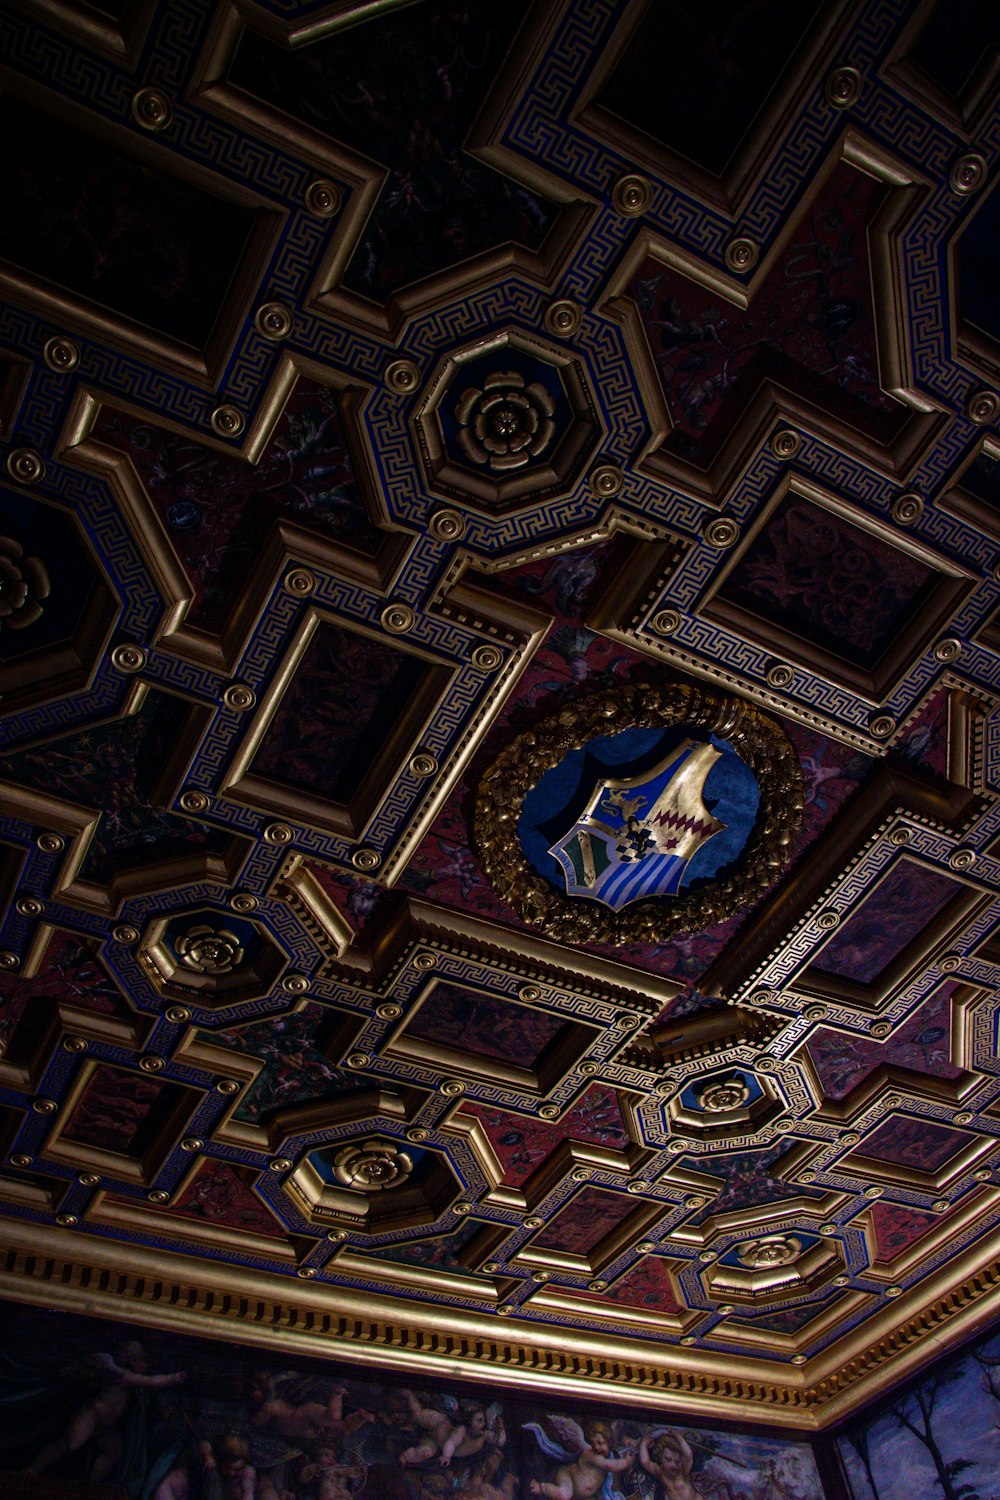 a decorative ceiling with a clock on it